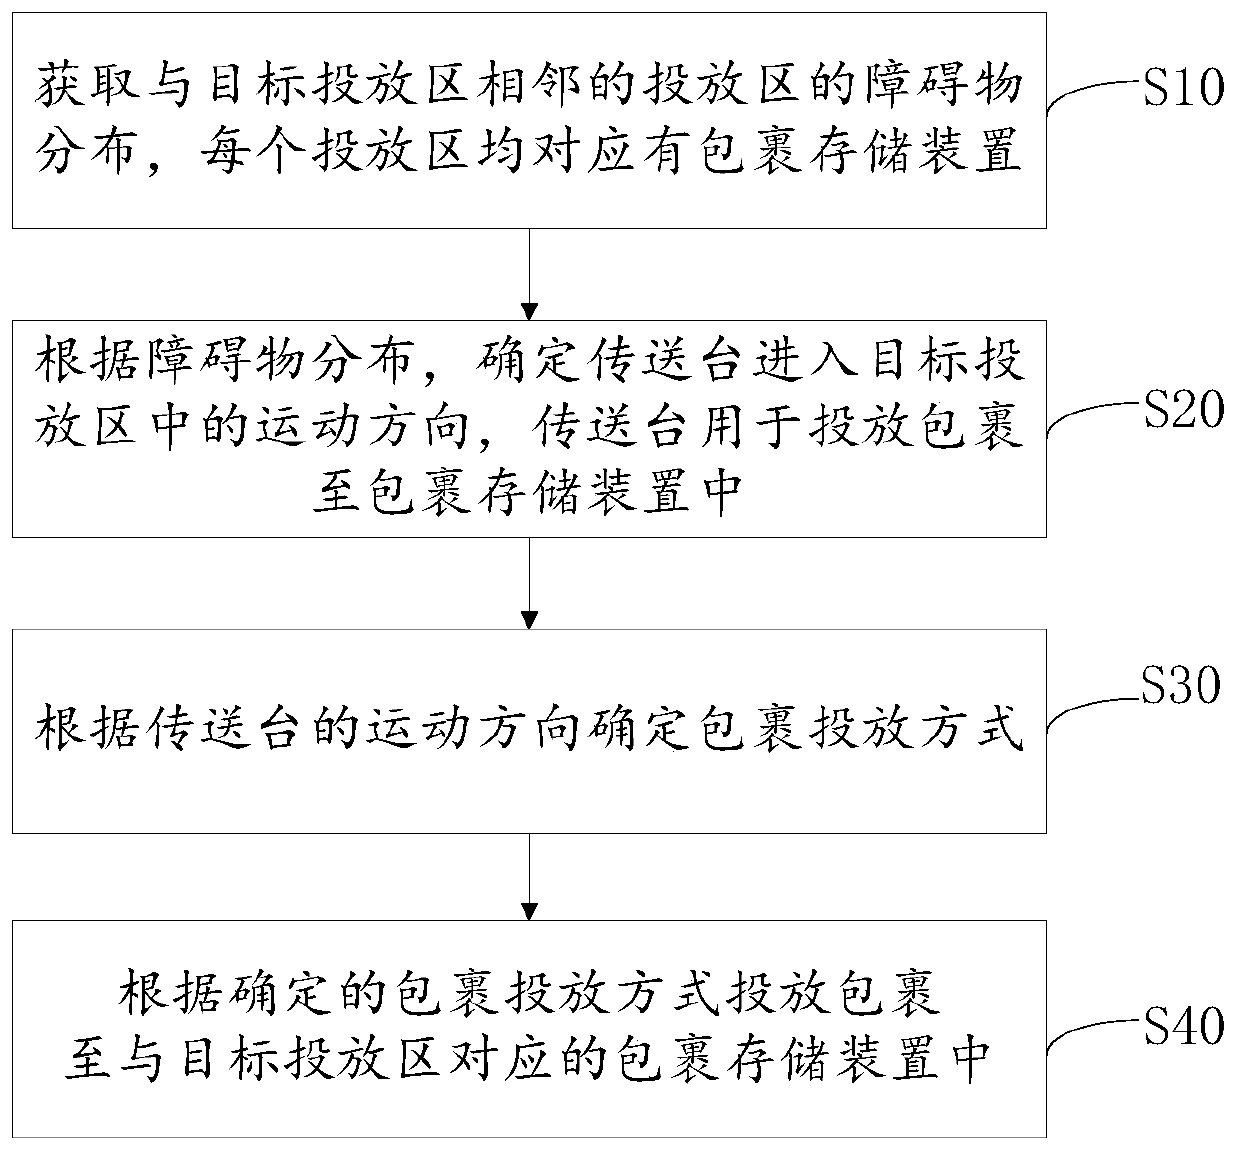 Parcel delivery method, parcel delivery control device and parcel delivery equipment